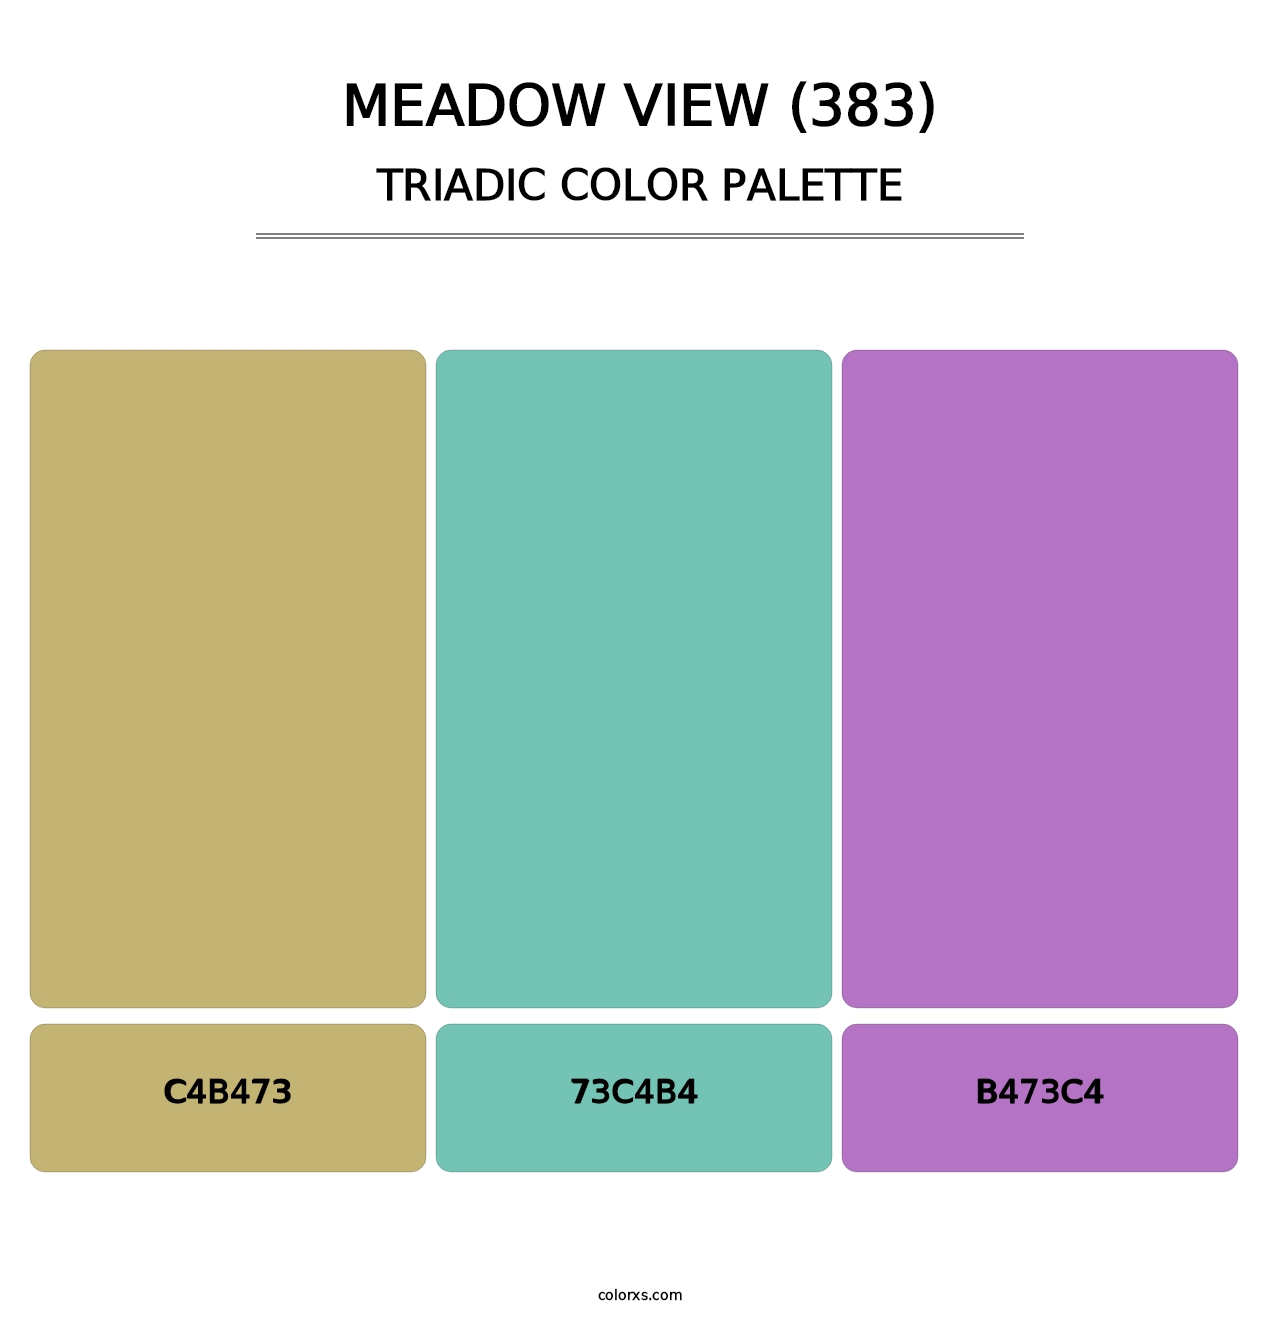 Meadow View (383) - Triadic Color Palette